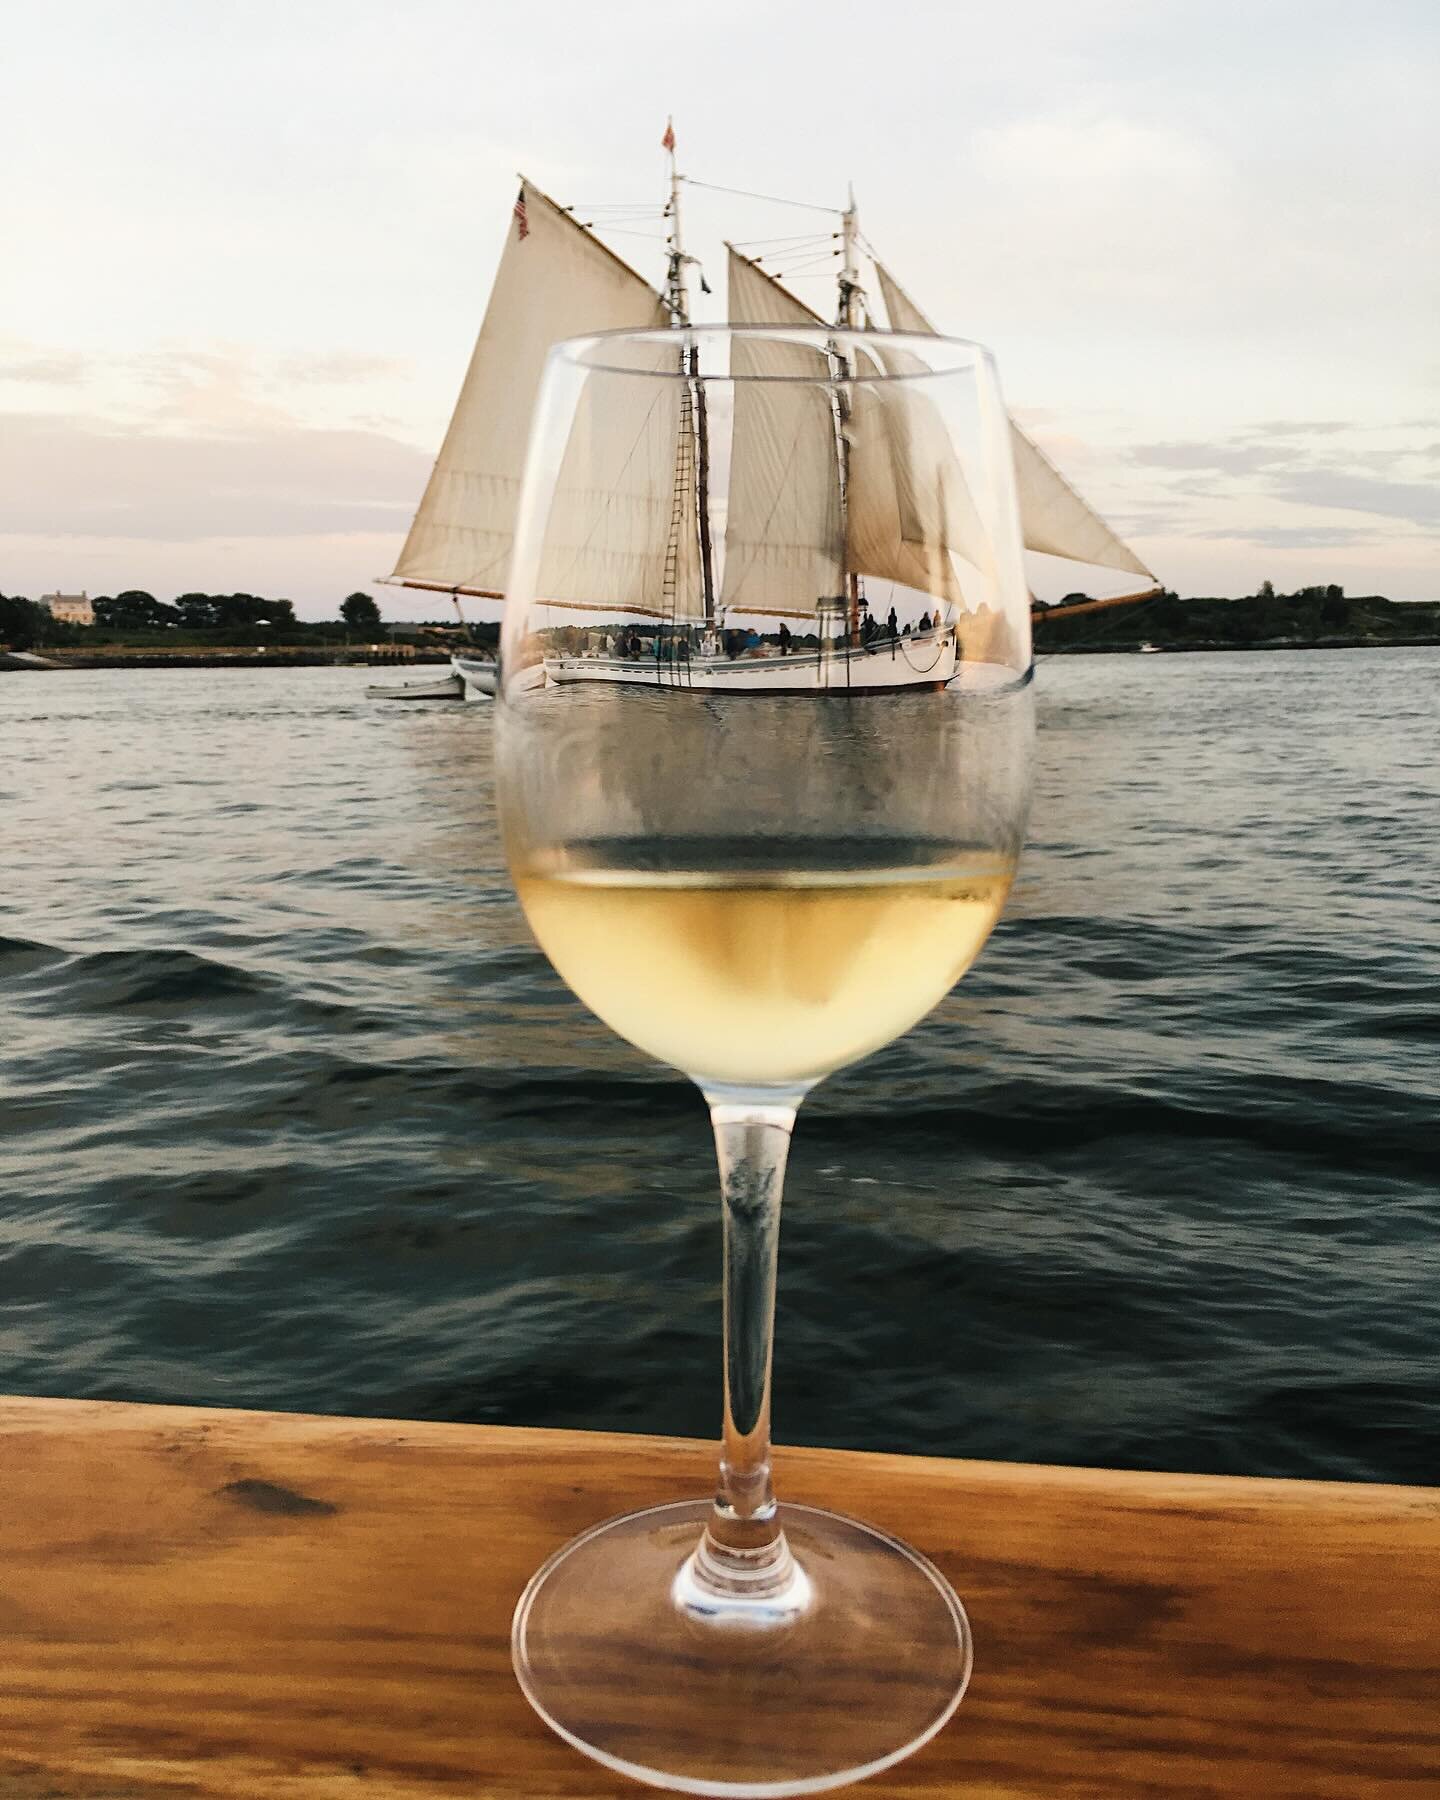 We&rsquo;re planning an incredible summer 2024 for you in #portlandmaine! We&rsquo;re happy to let you know that we will beginning our 2024 wine sail season on June 7th on the immaculate Tall Ship, @francesproject. ☀️🍷⛵️

All tickets are now on sale